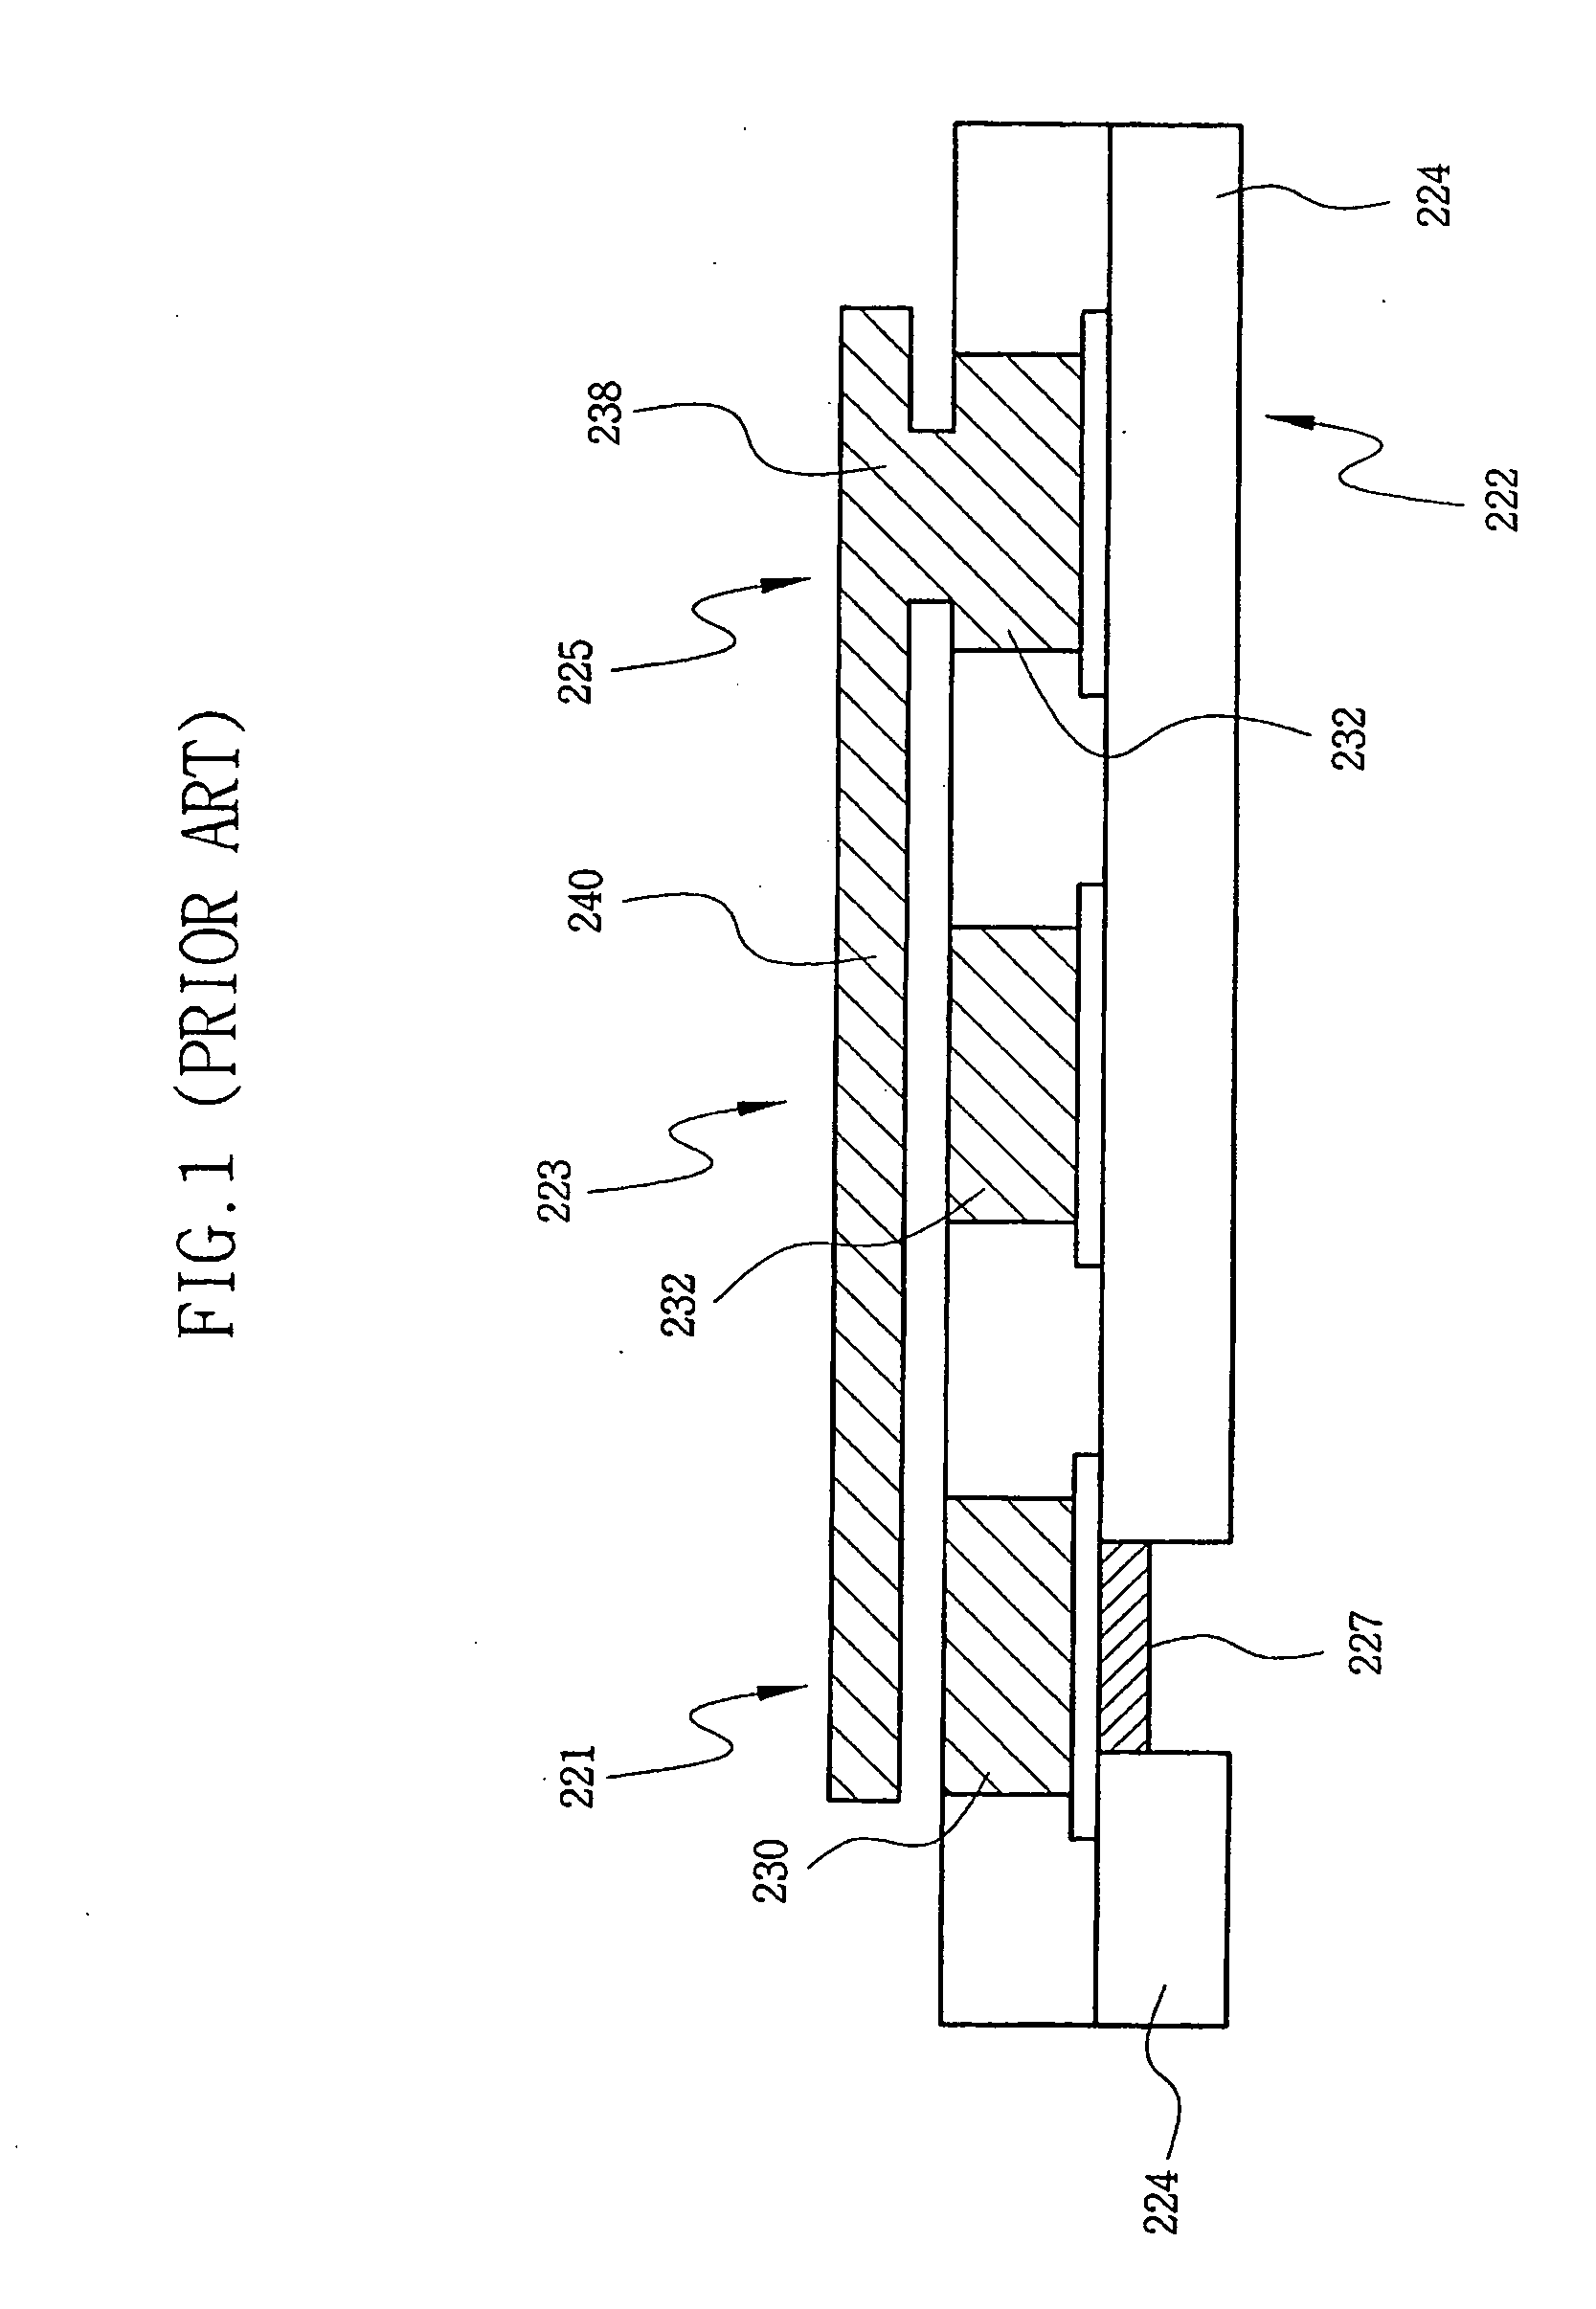 Multi-bit electro-mechanical memory device and method of manufacturing the same